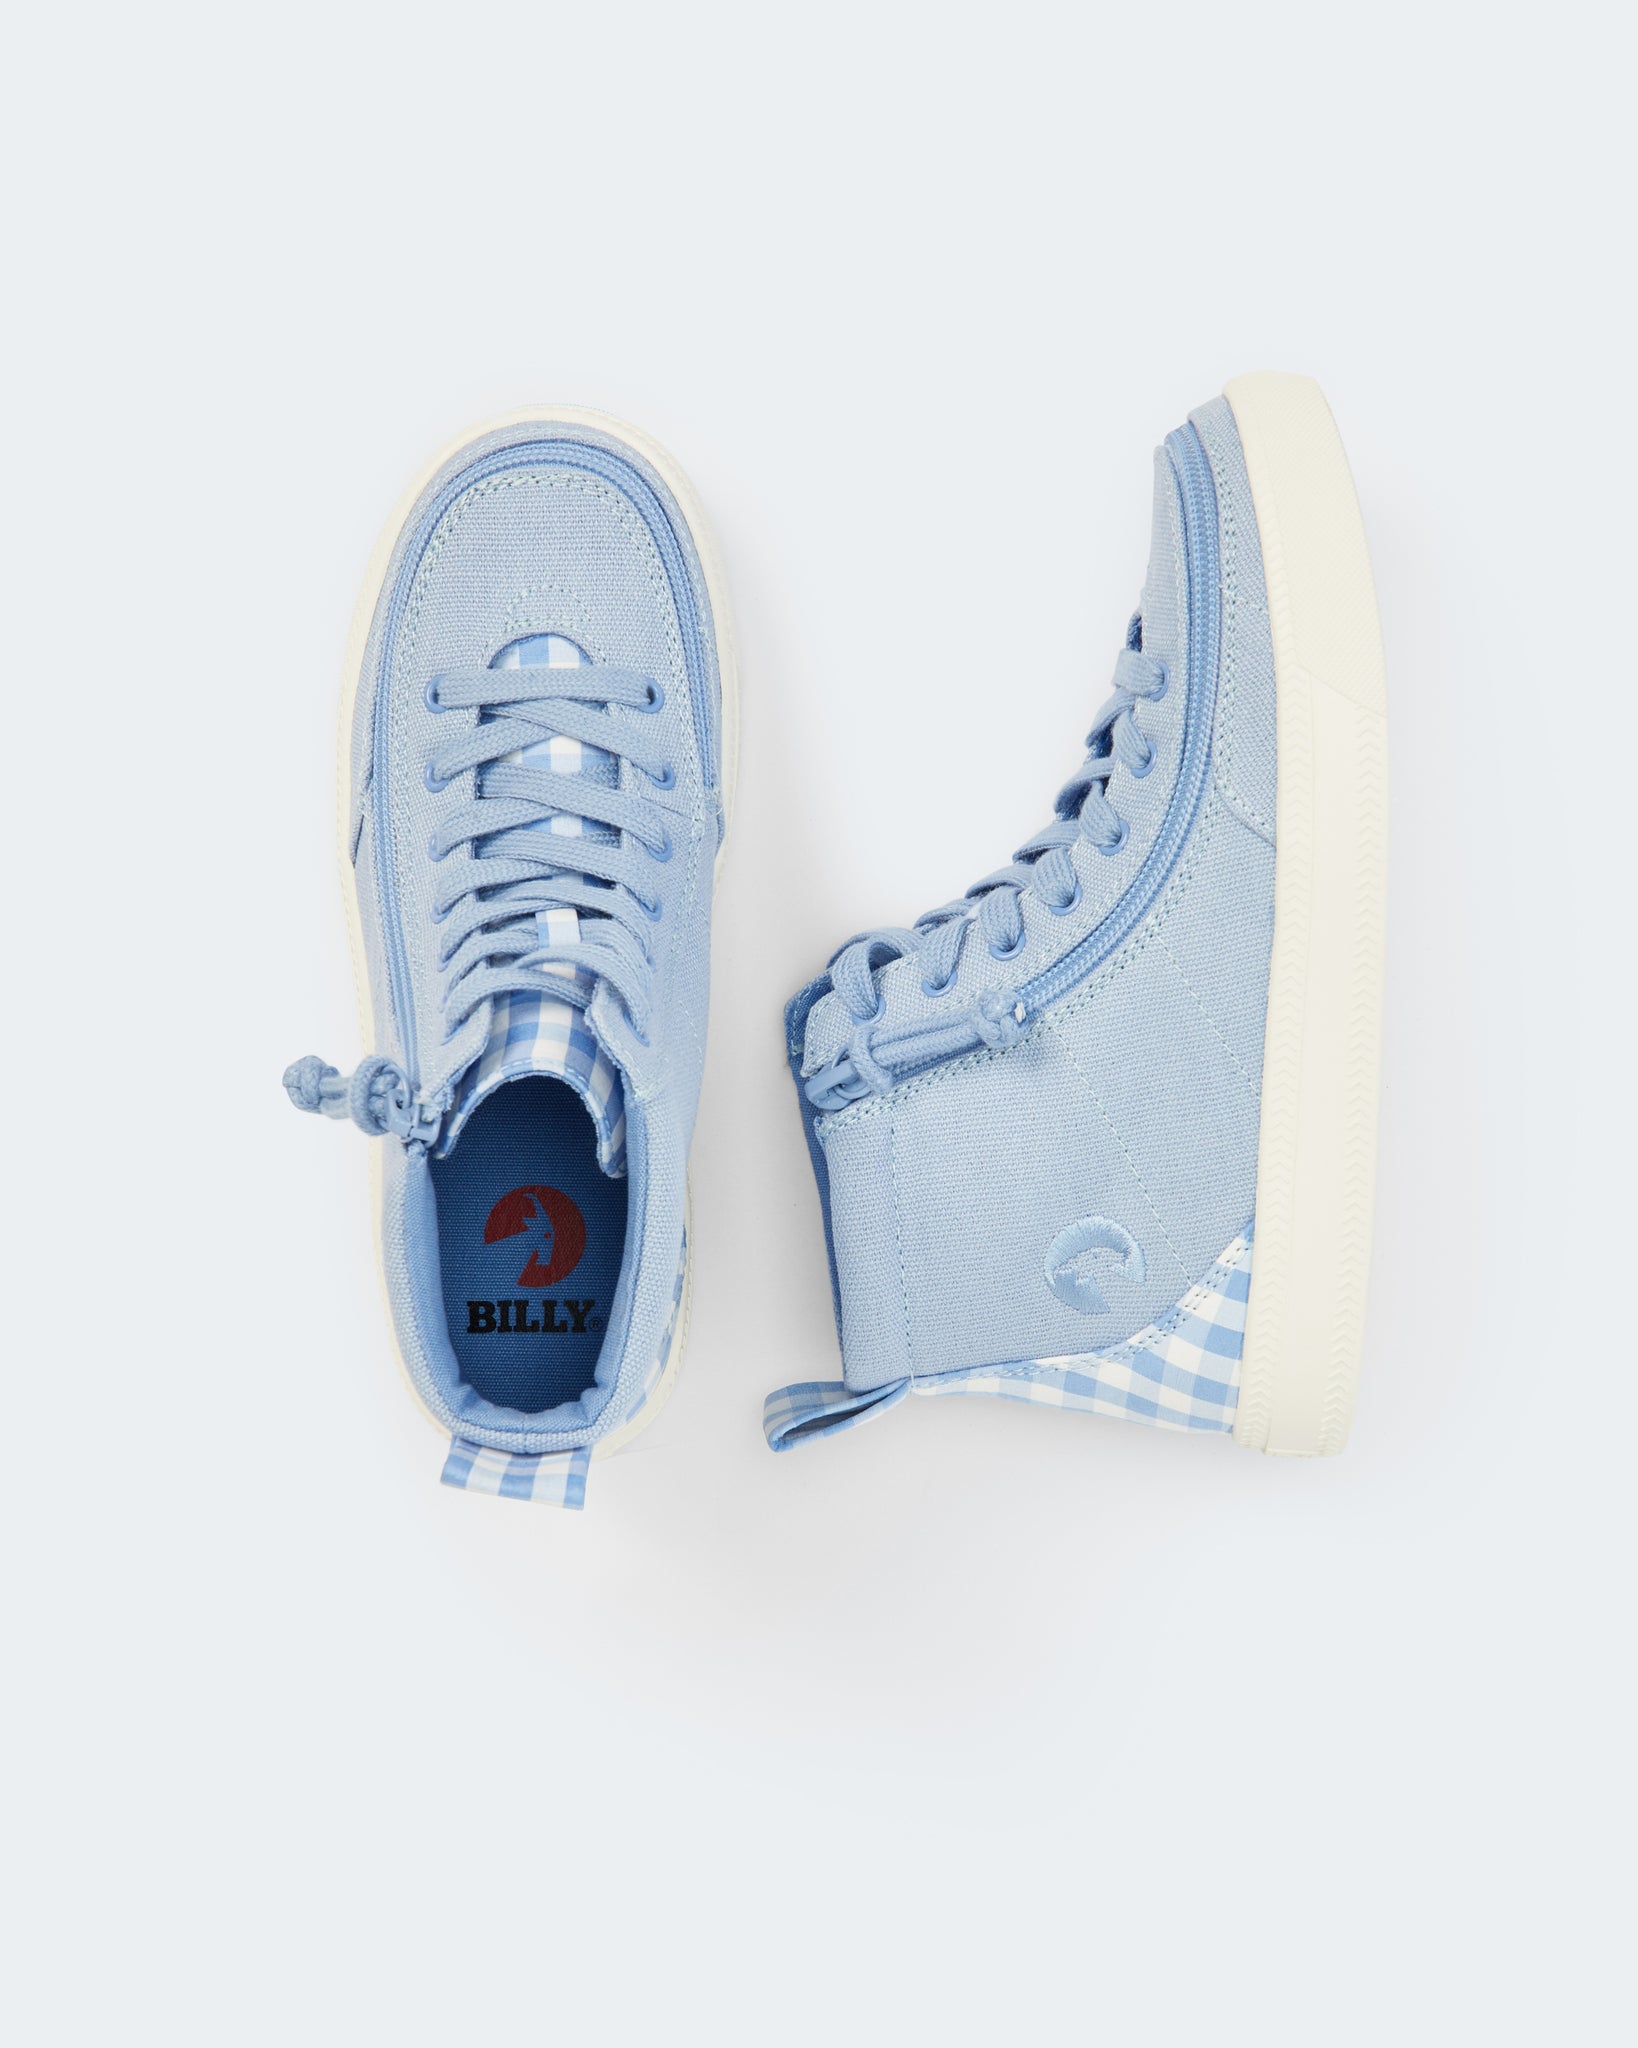 Classic High Top (Toddler) - Blue Gingham